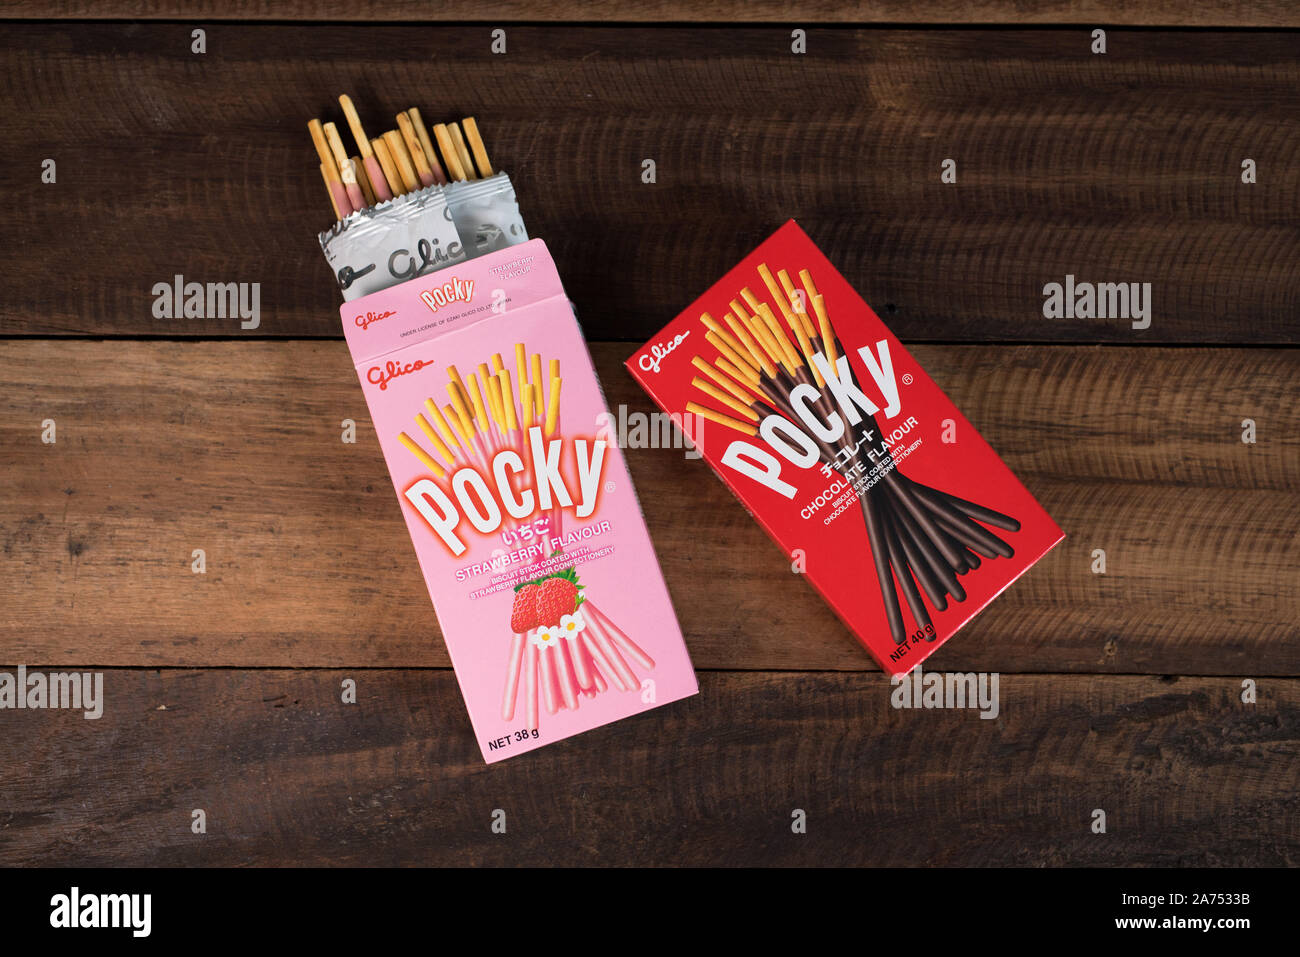 Petaling jaya, Selangor, Malaysia - 20 Oktober 2019 : Pocky brand of chocolate sticks on wooden background. Pocky is a famous confectionery among asia Stock Photo